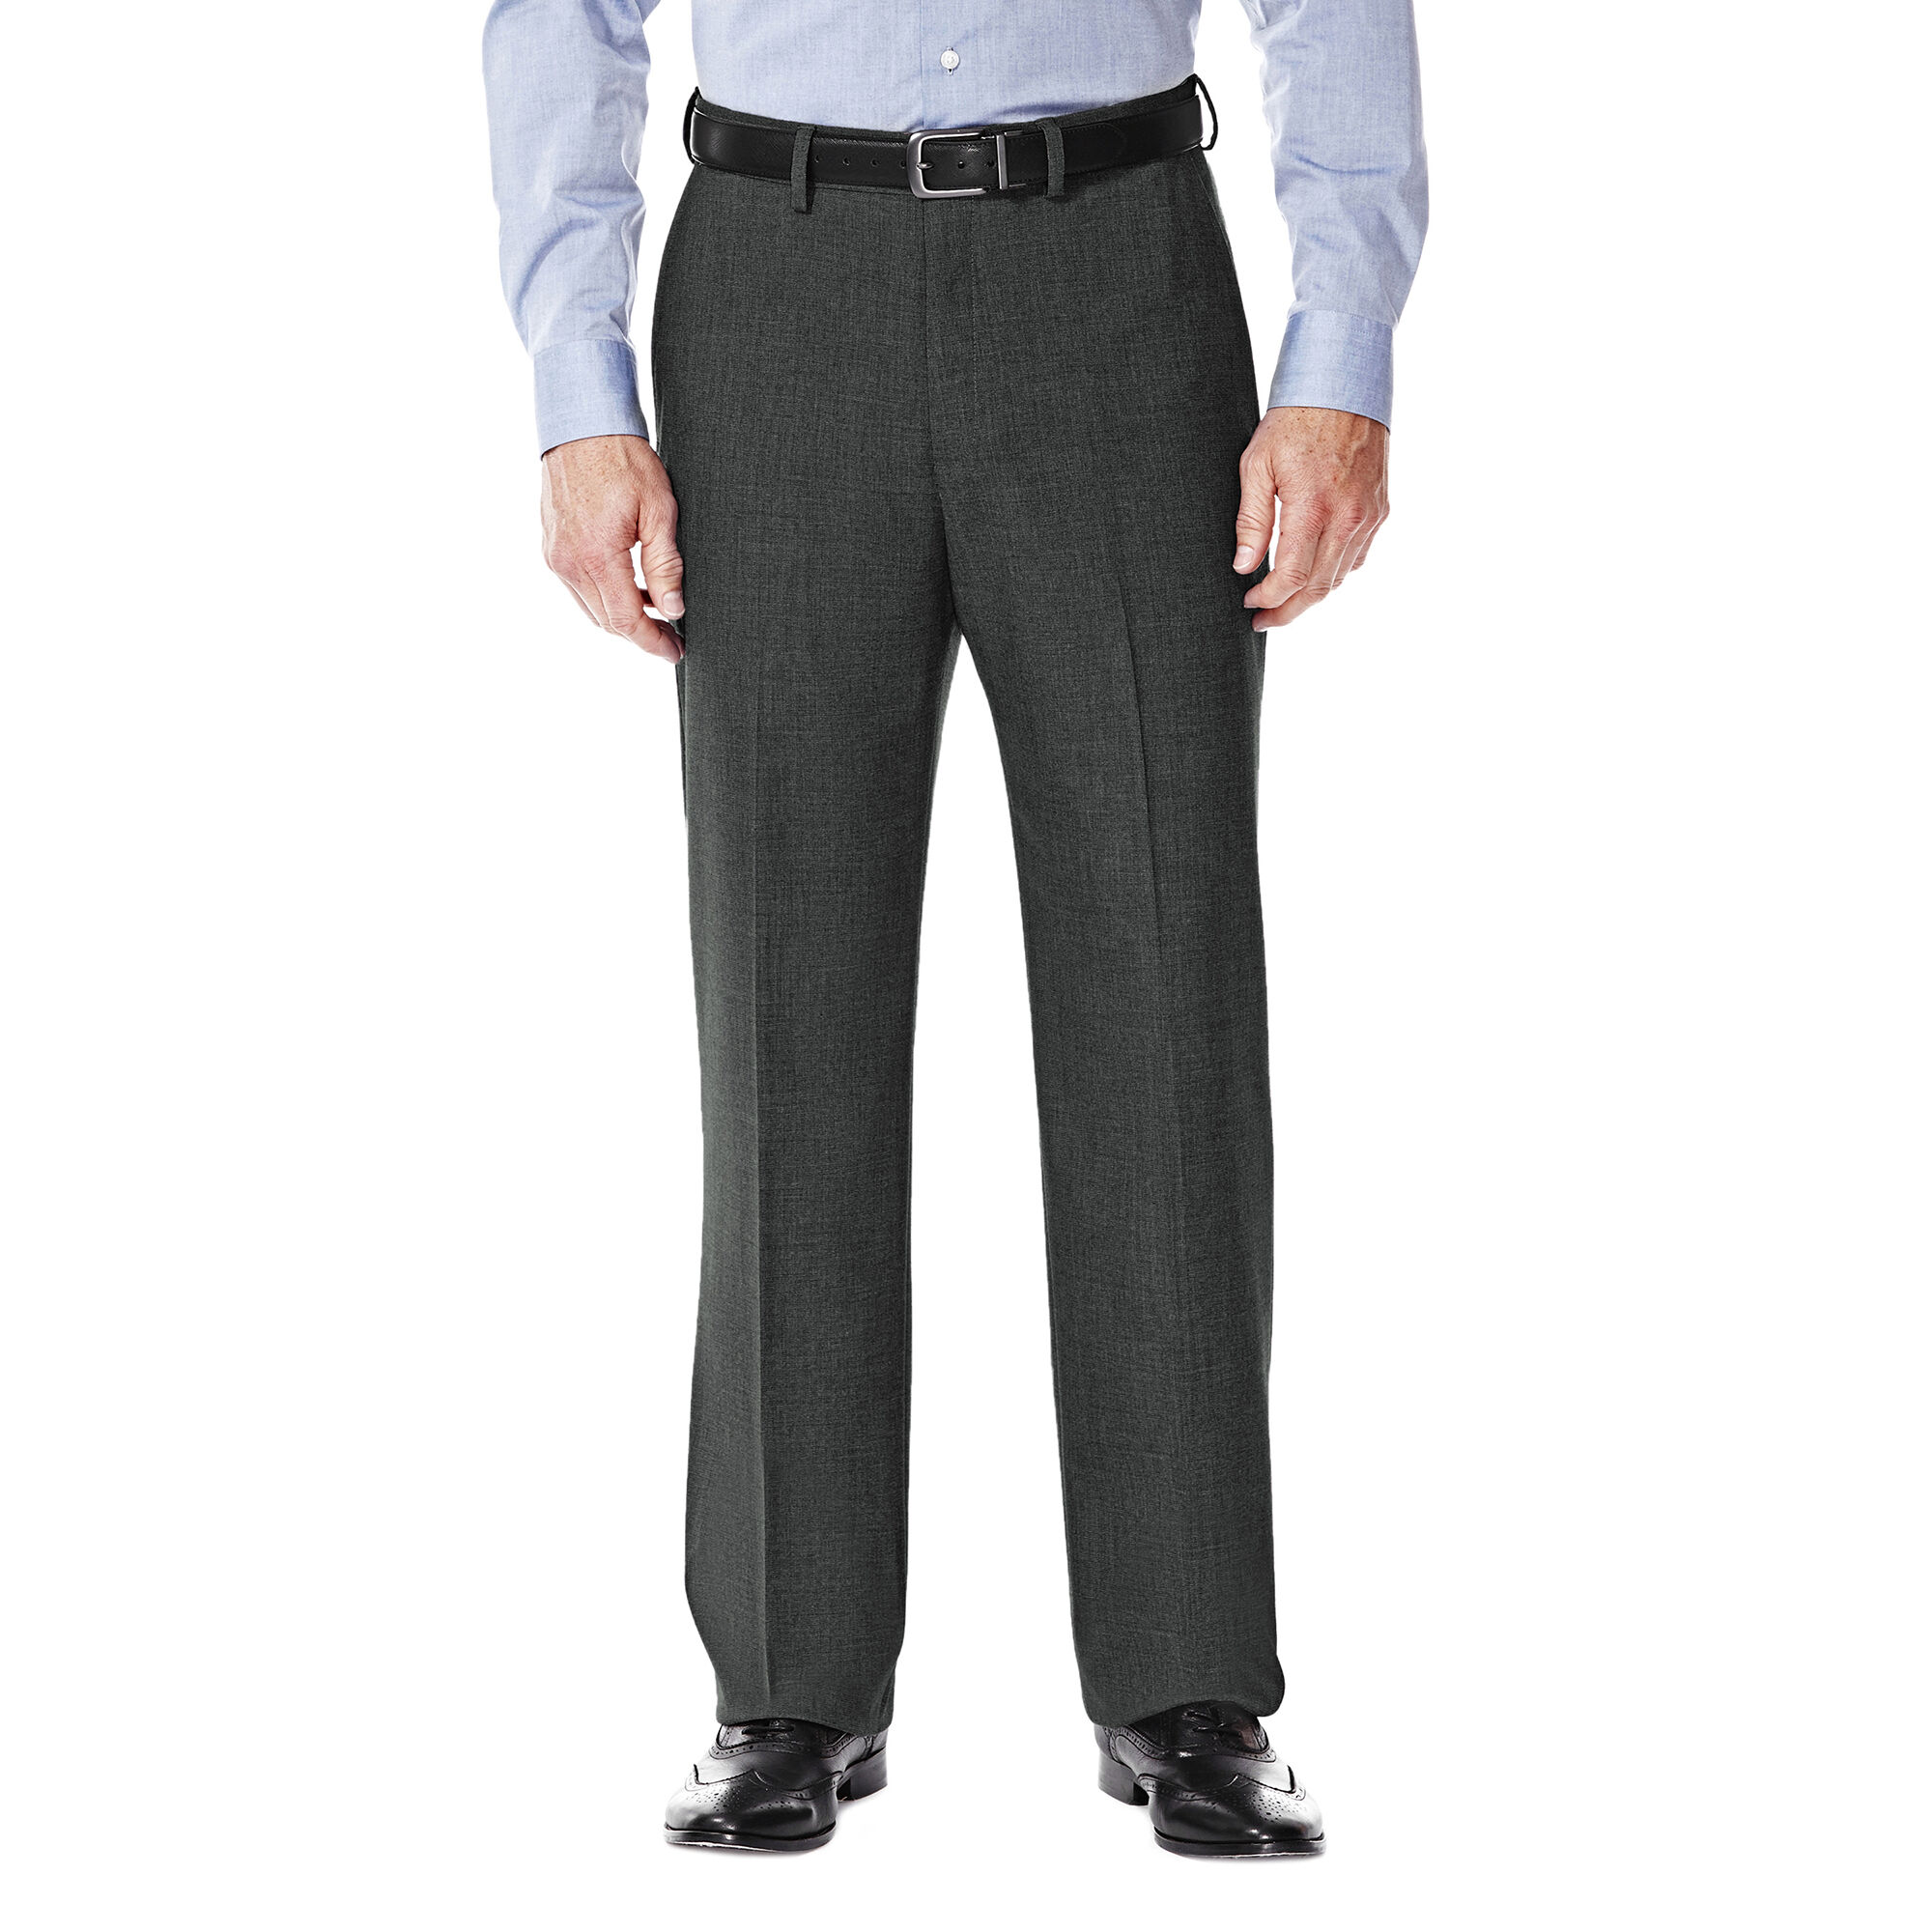 J.M. Haggar Premium Stretch Suit Pant - Flat Front Med Grey (HY00182 Clothing Pants) photo